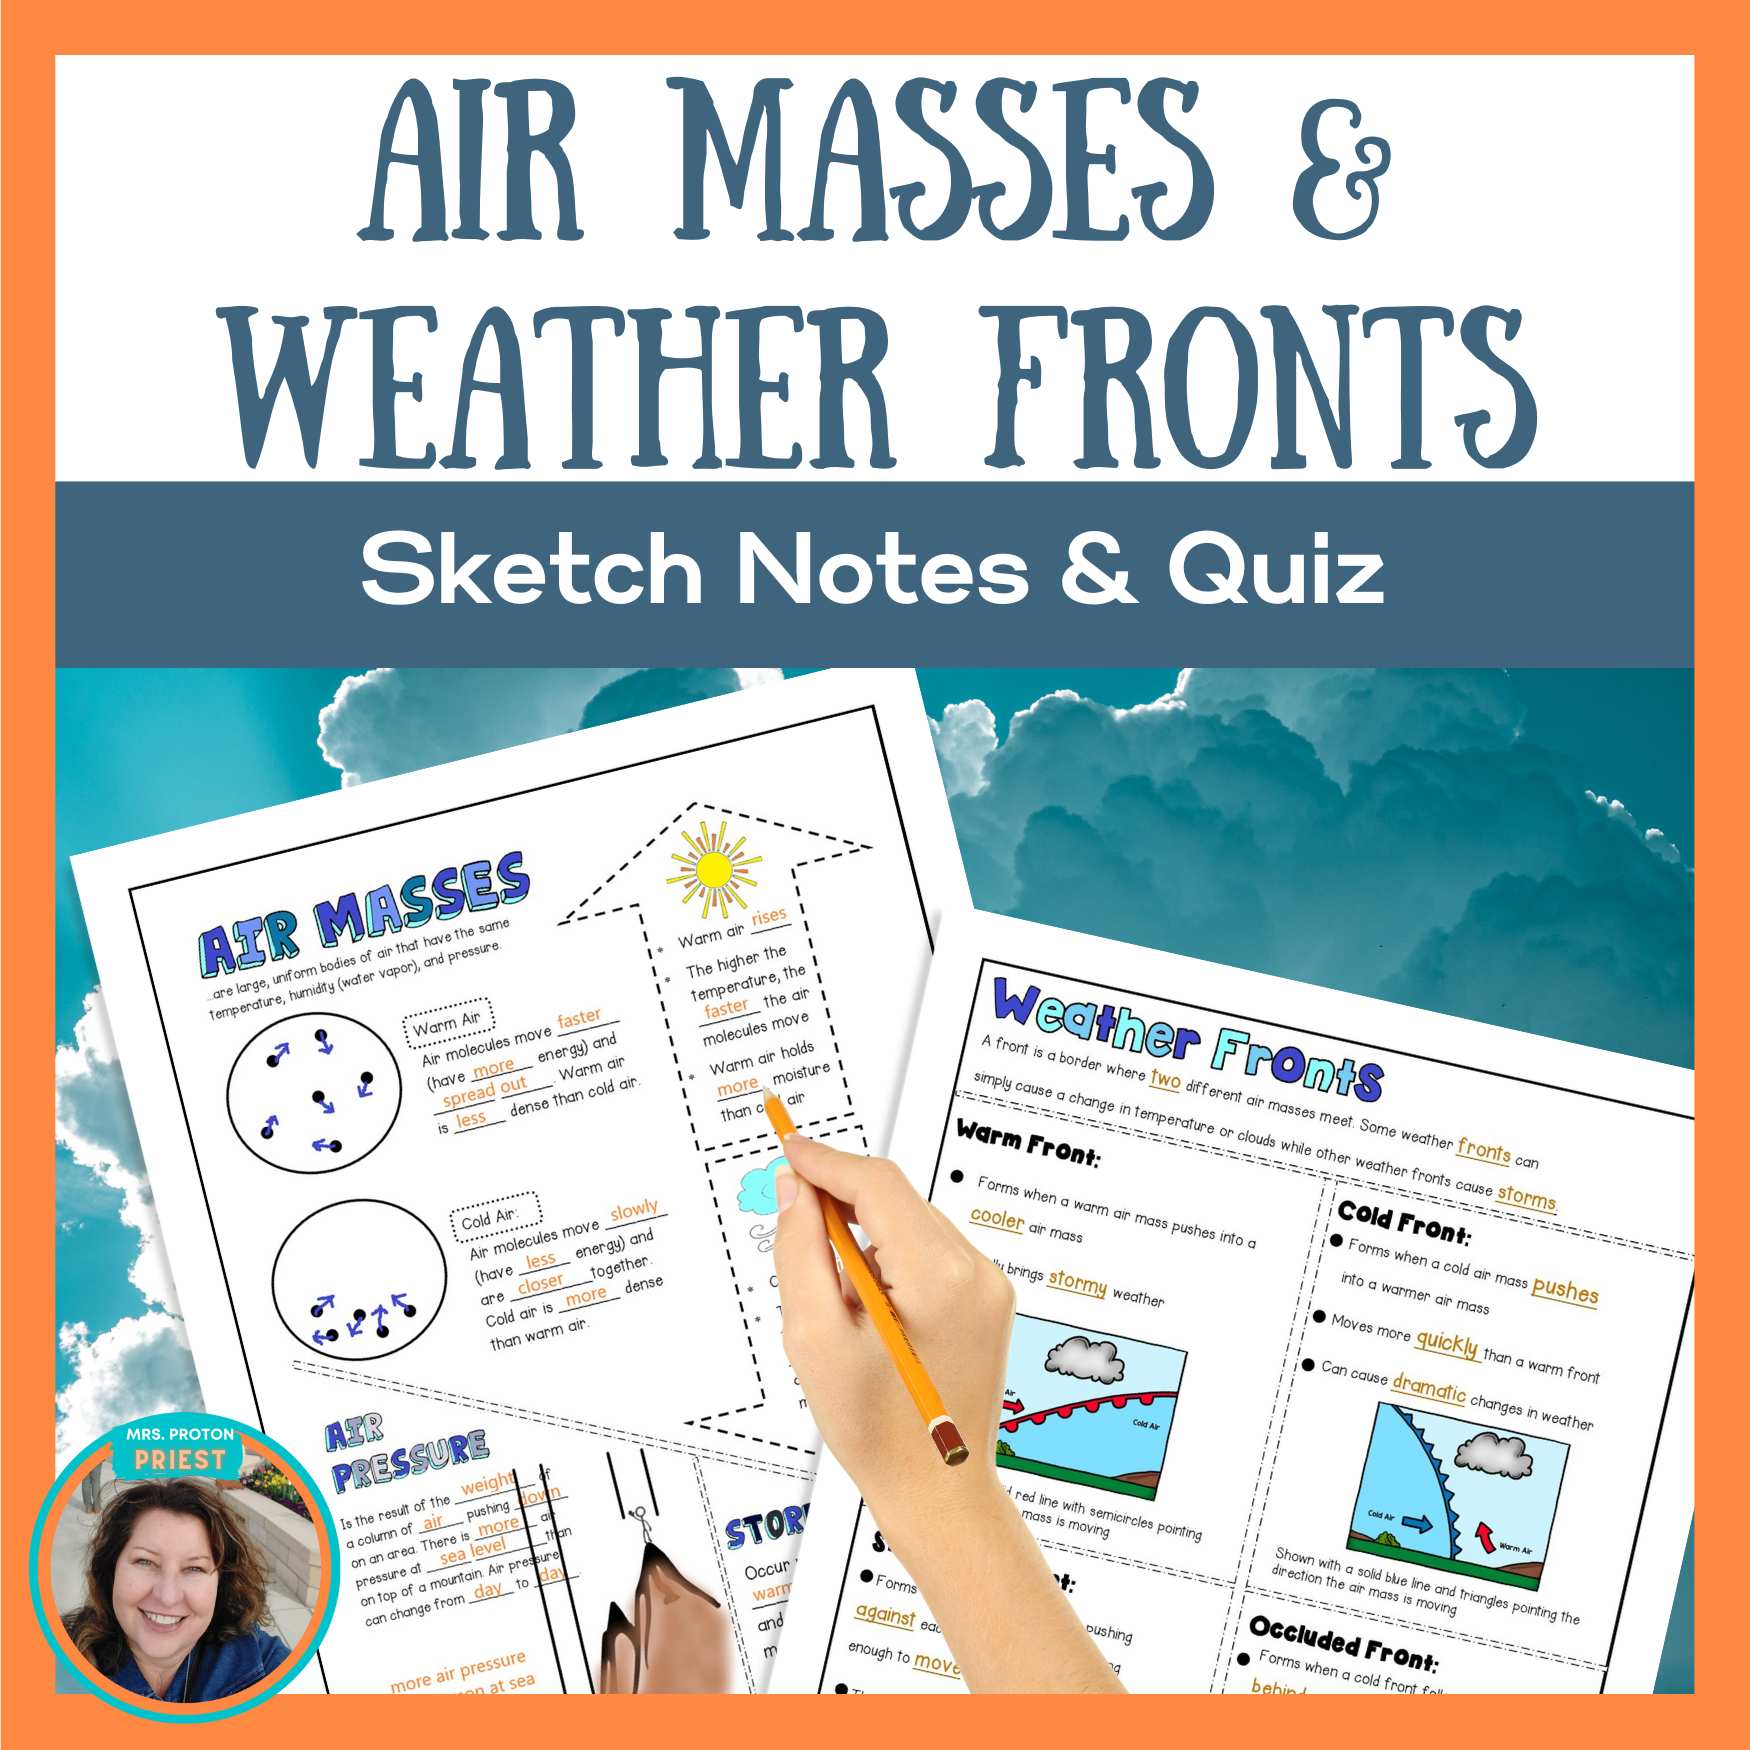 Air Masses and Weather Fronts Sketch Notes, Quiz, & Slideshow